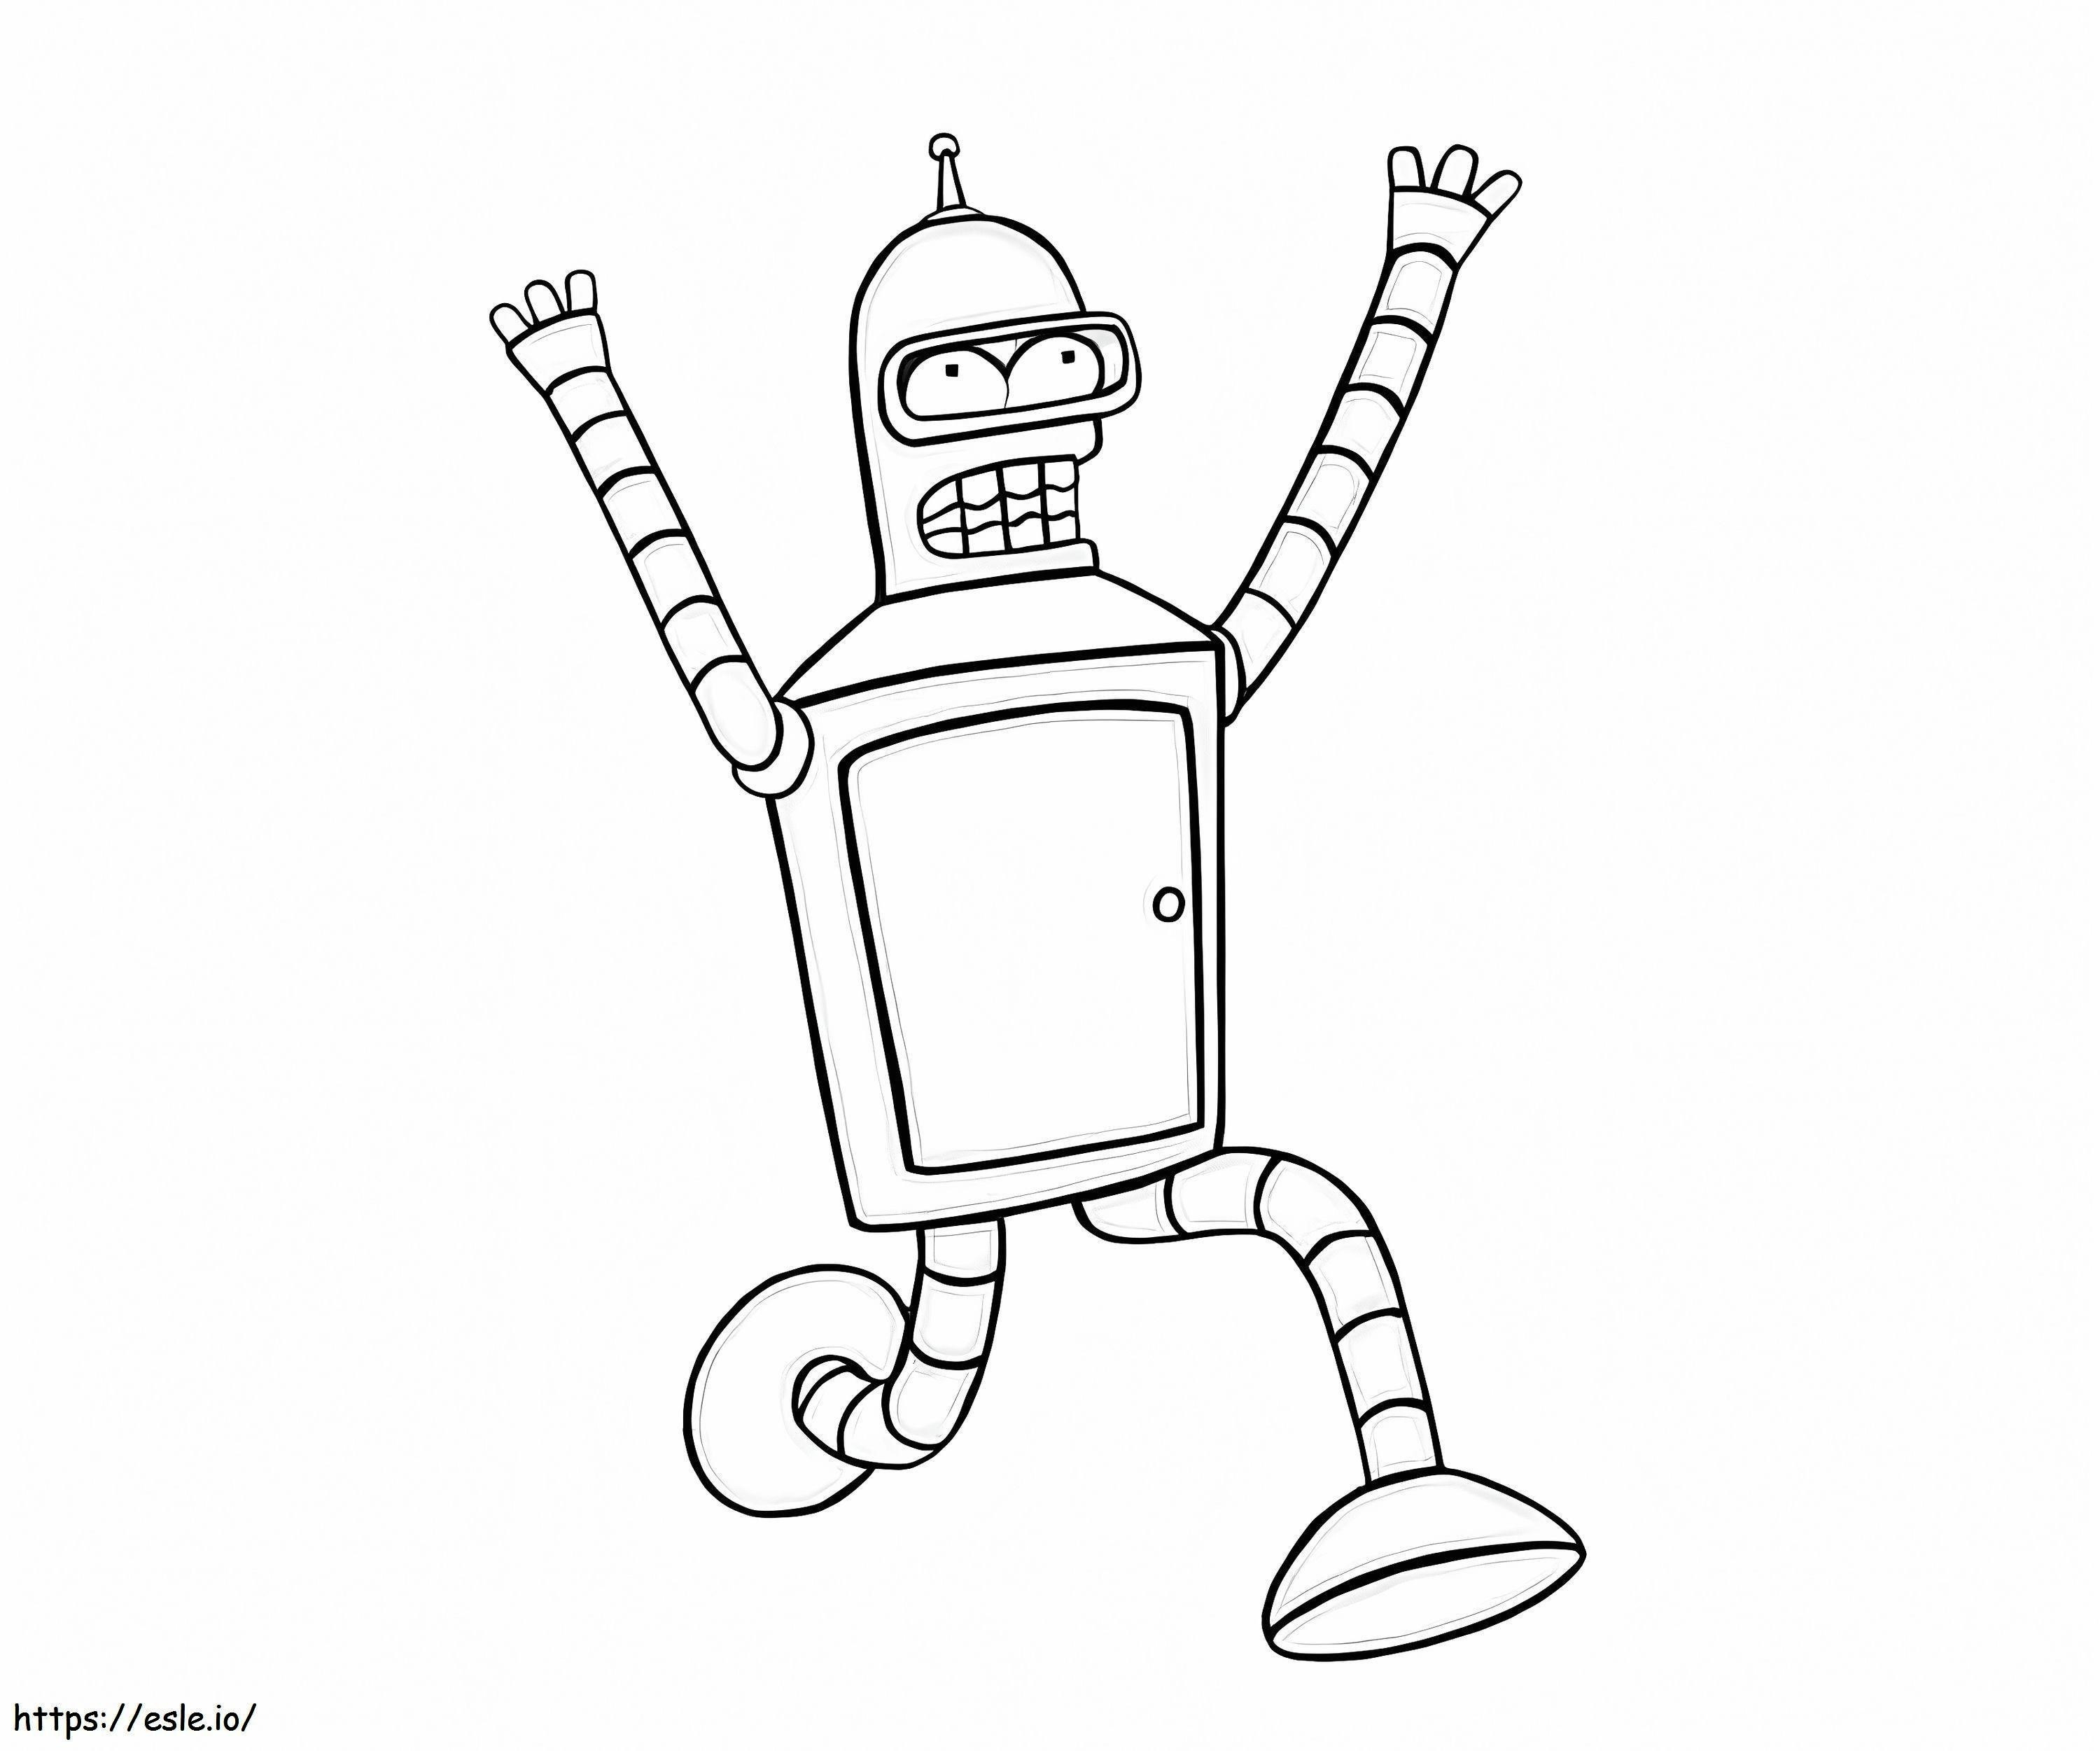 Running Bender coloring page